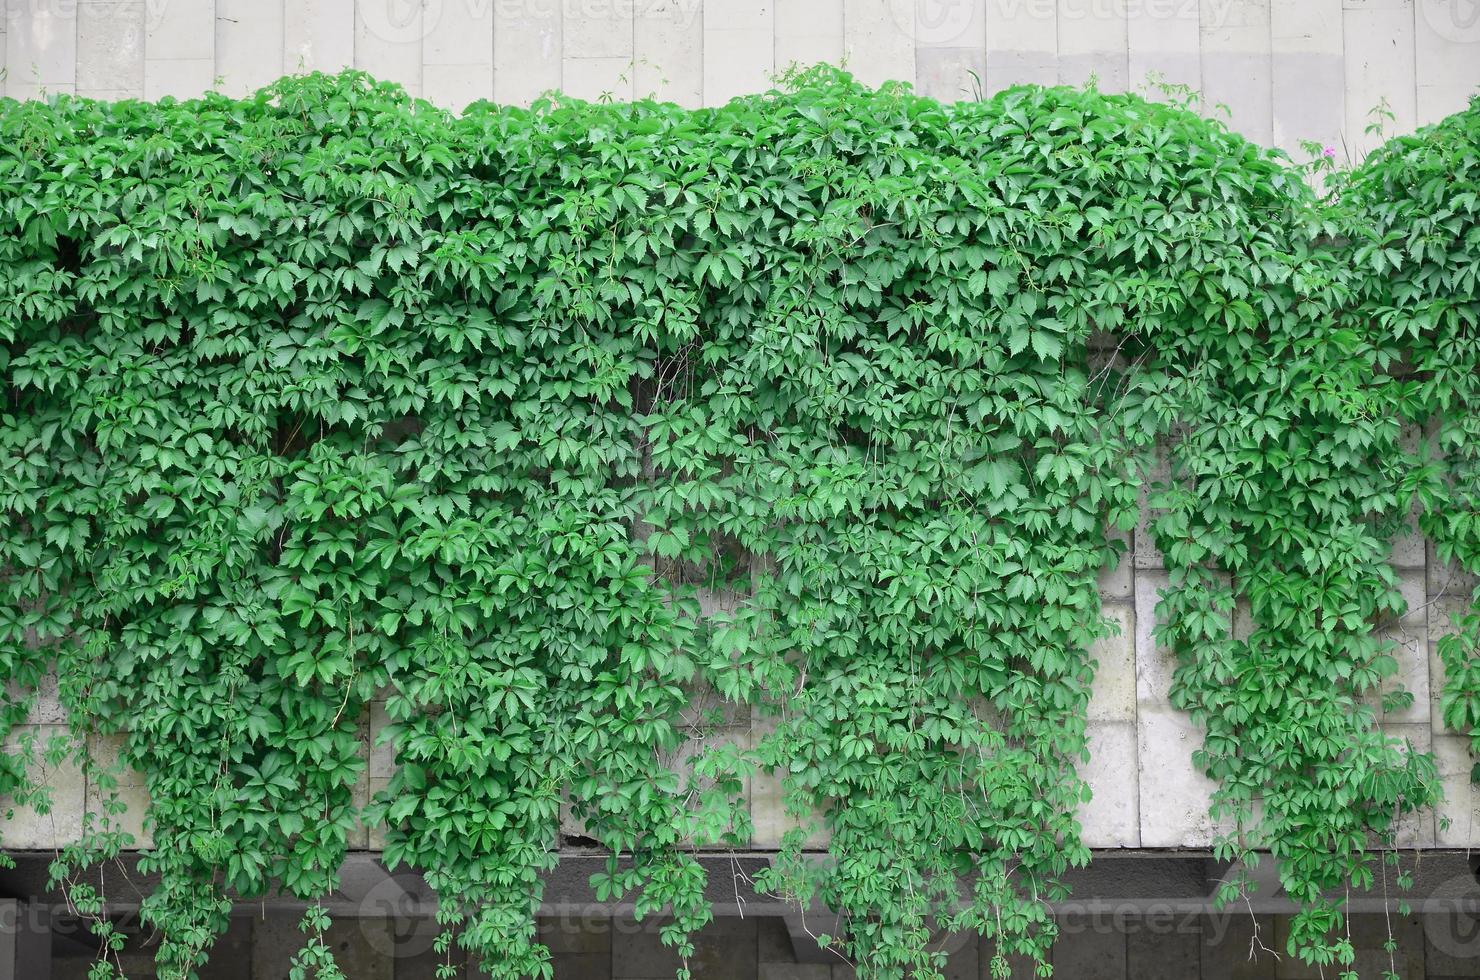 Green ivy grows along the beige wall of painted tiles. Texture of dense thickets of wild ivy photo